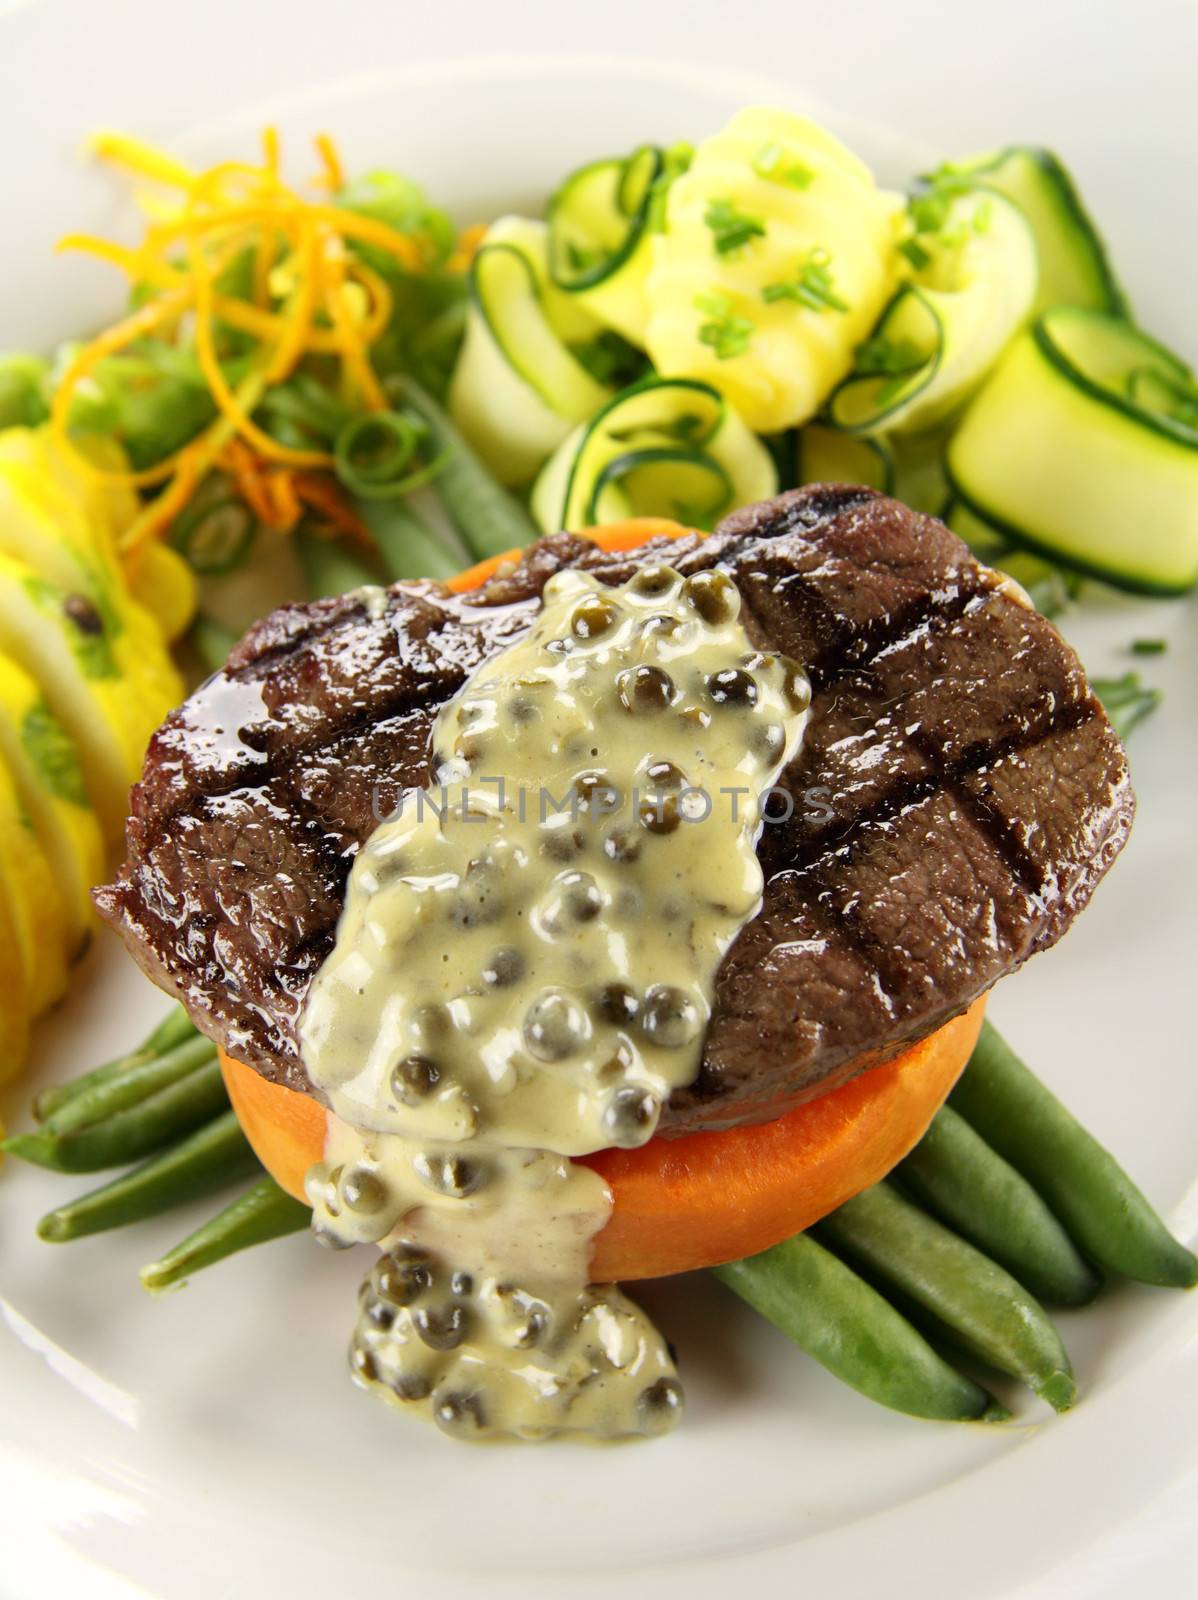 Chargrilled steak on sweet potato with green peppercorn sauce.